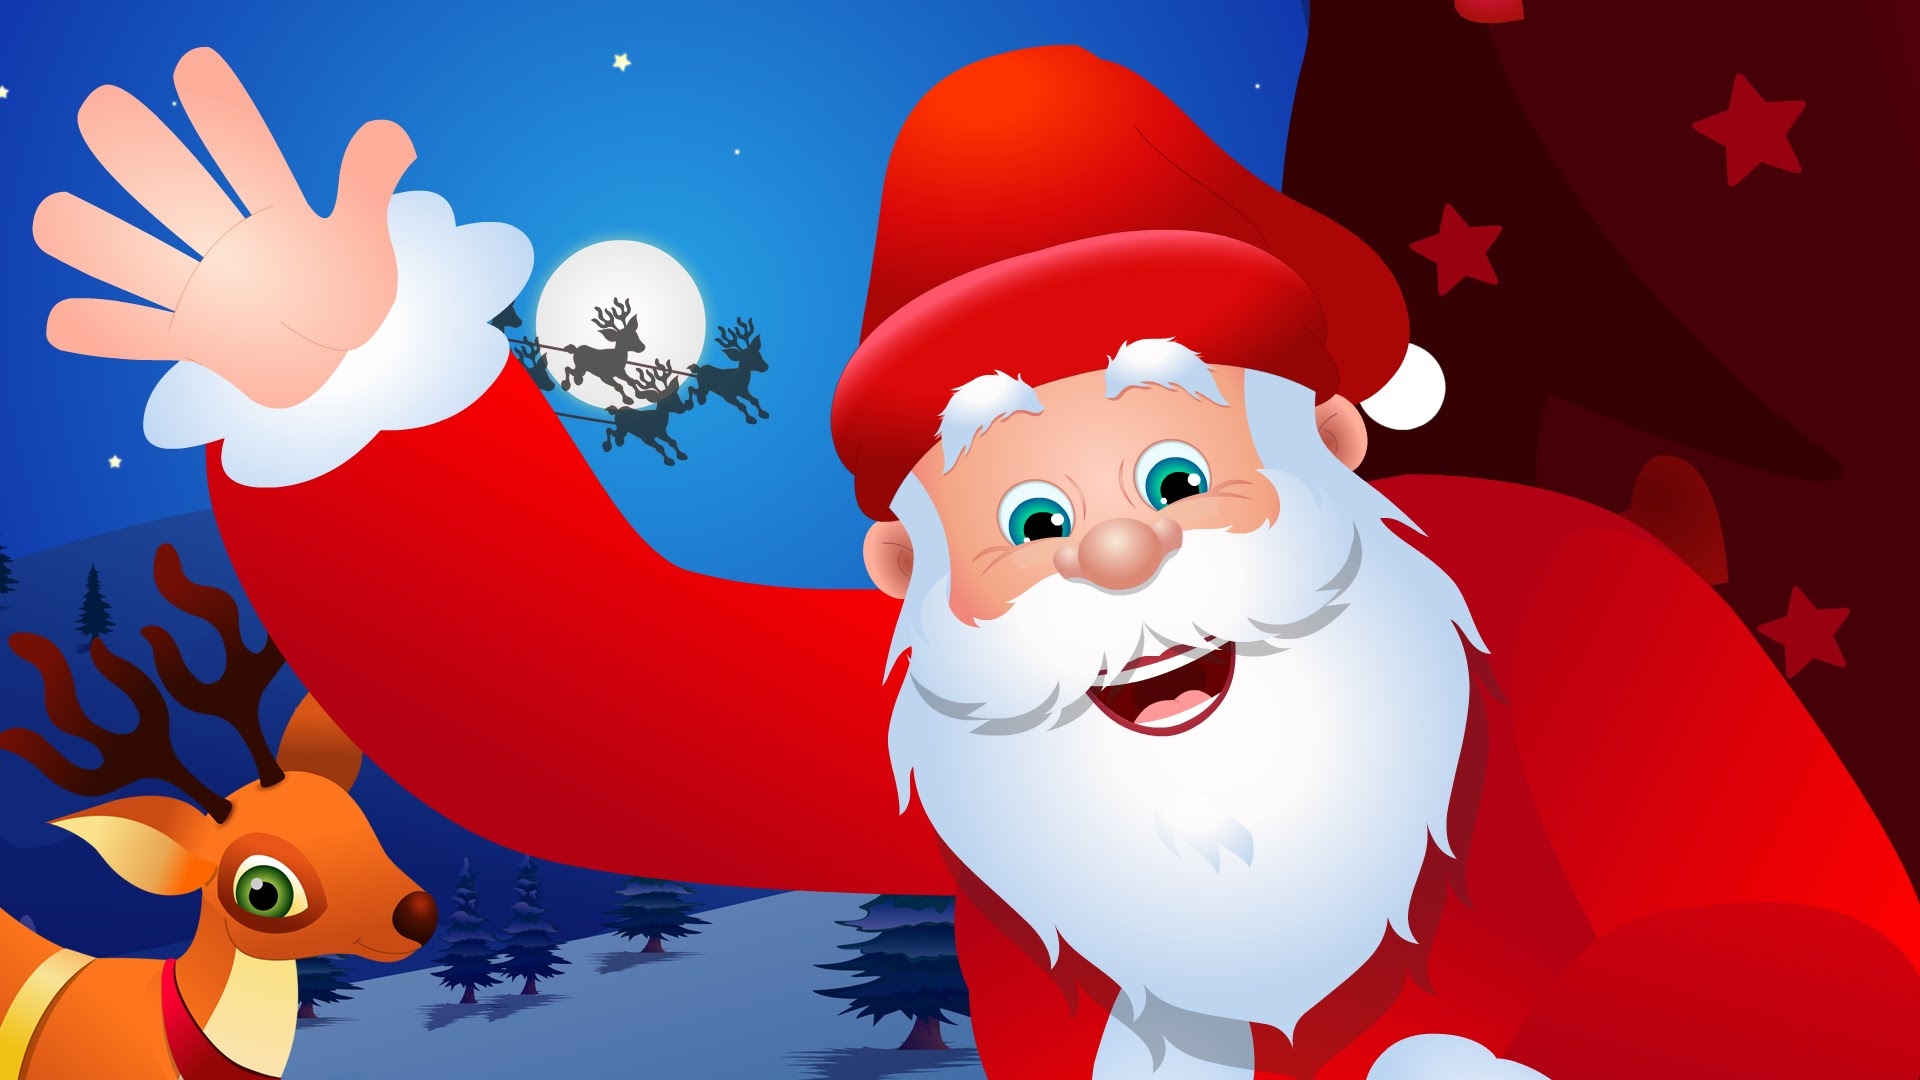 Christmas Animated Wallpaper Android App - Santa Claus Image In Hd -  1920x1080 Wallpaper 